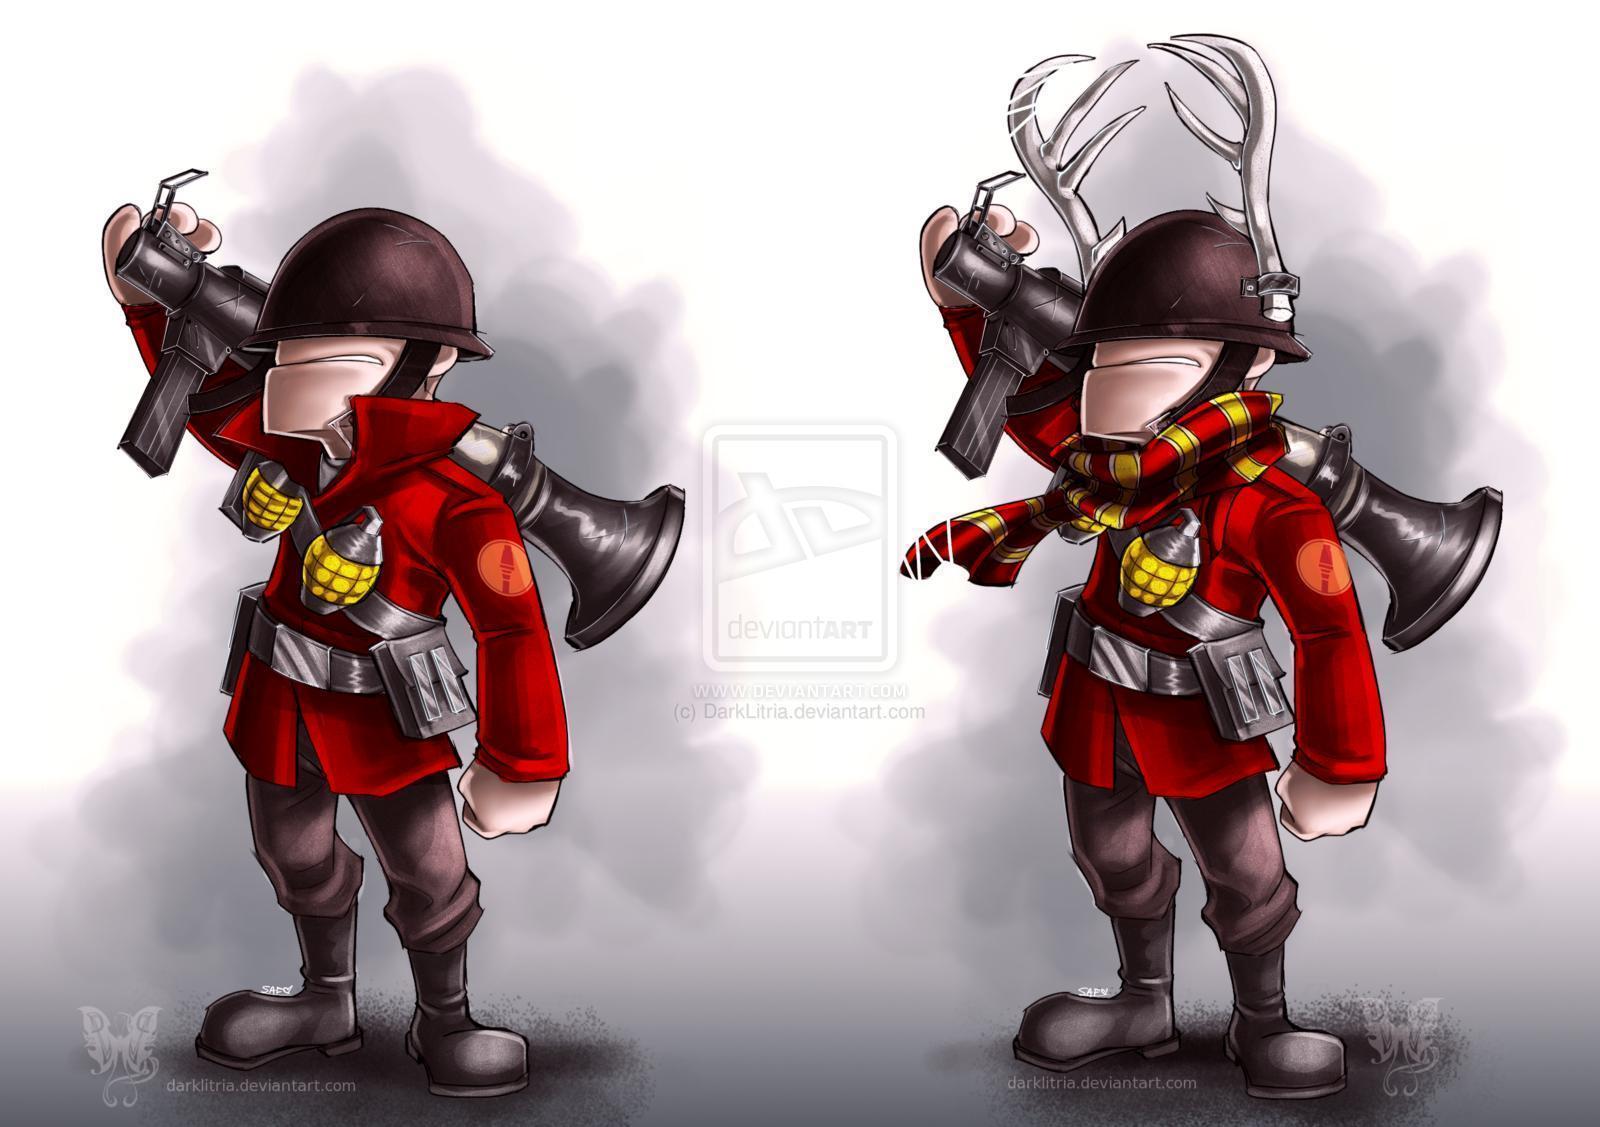 TF2: Little Soldiers